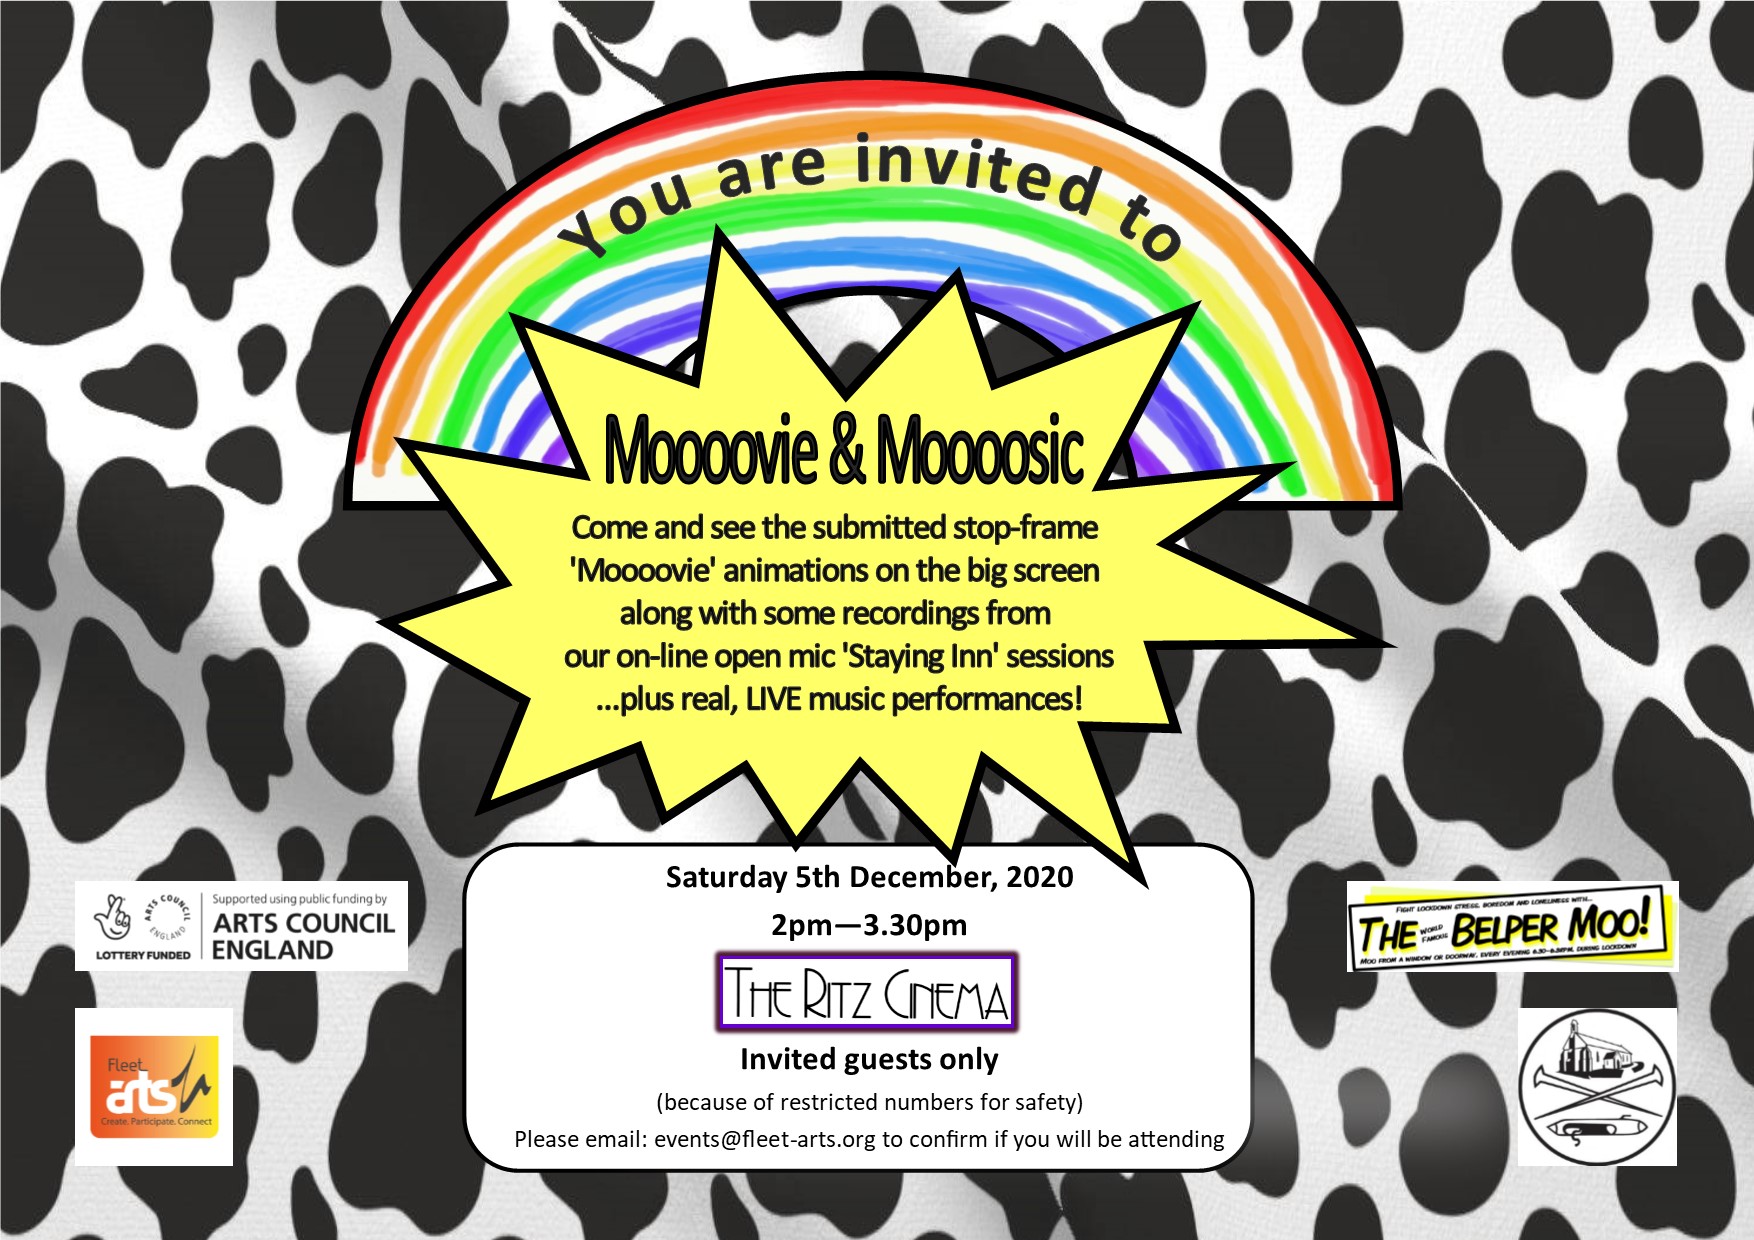 Mooooovie event to celebrate stopframe animations created to link with the Belper Moo during lockdown